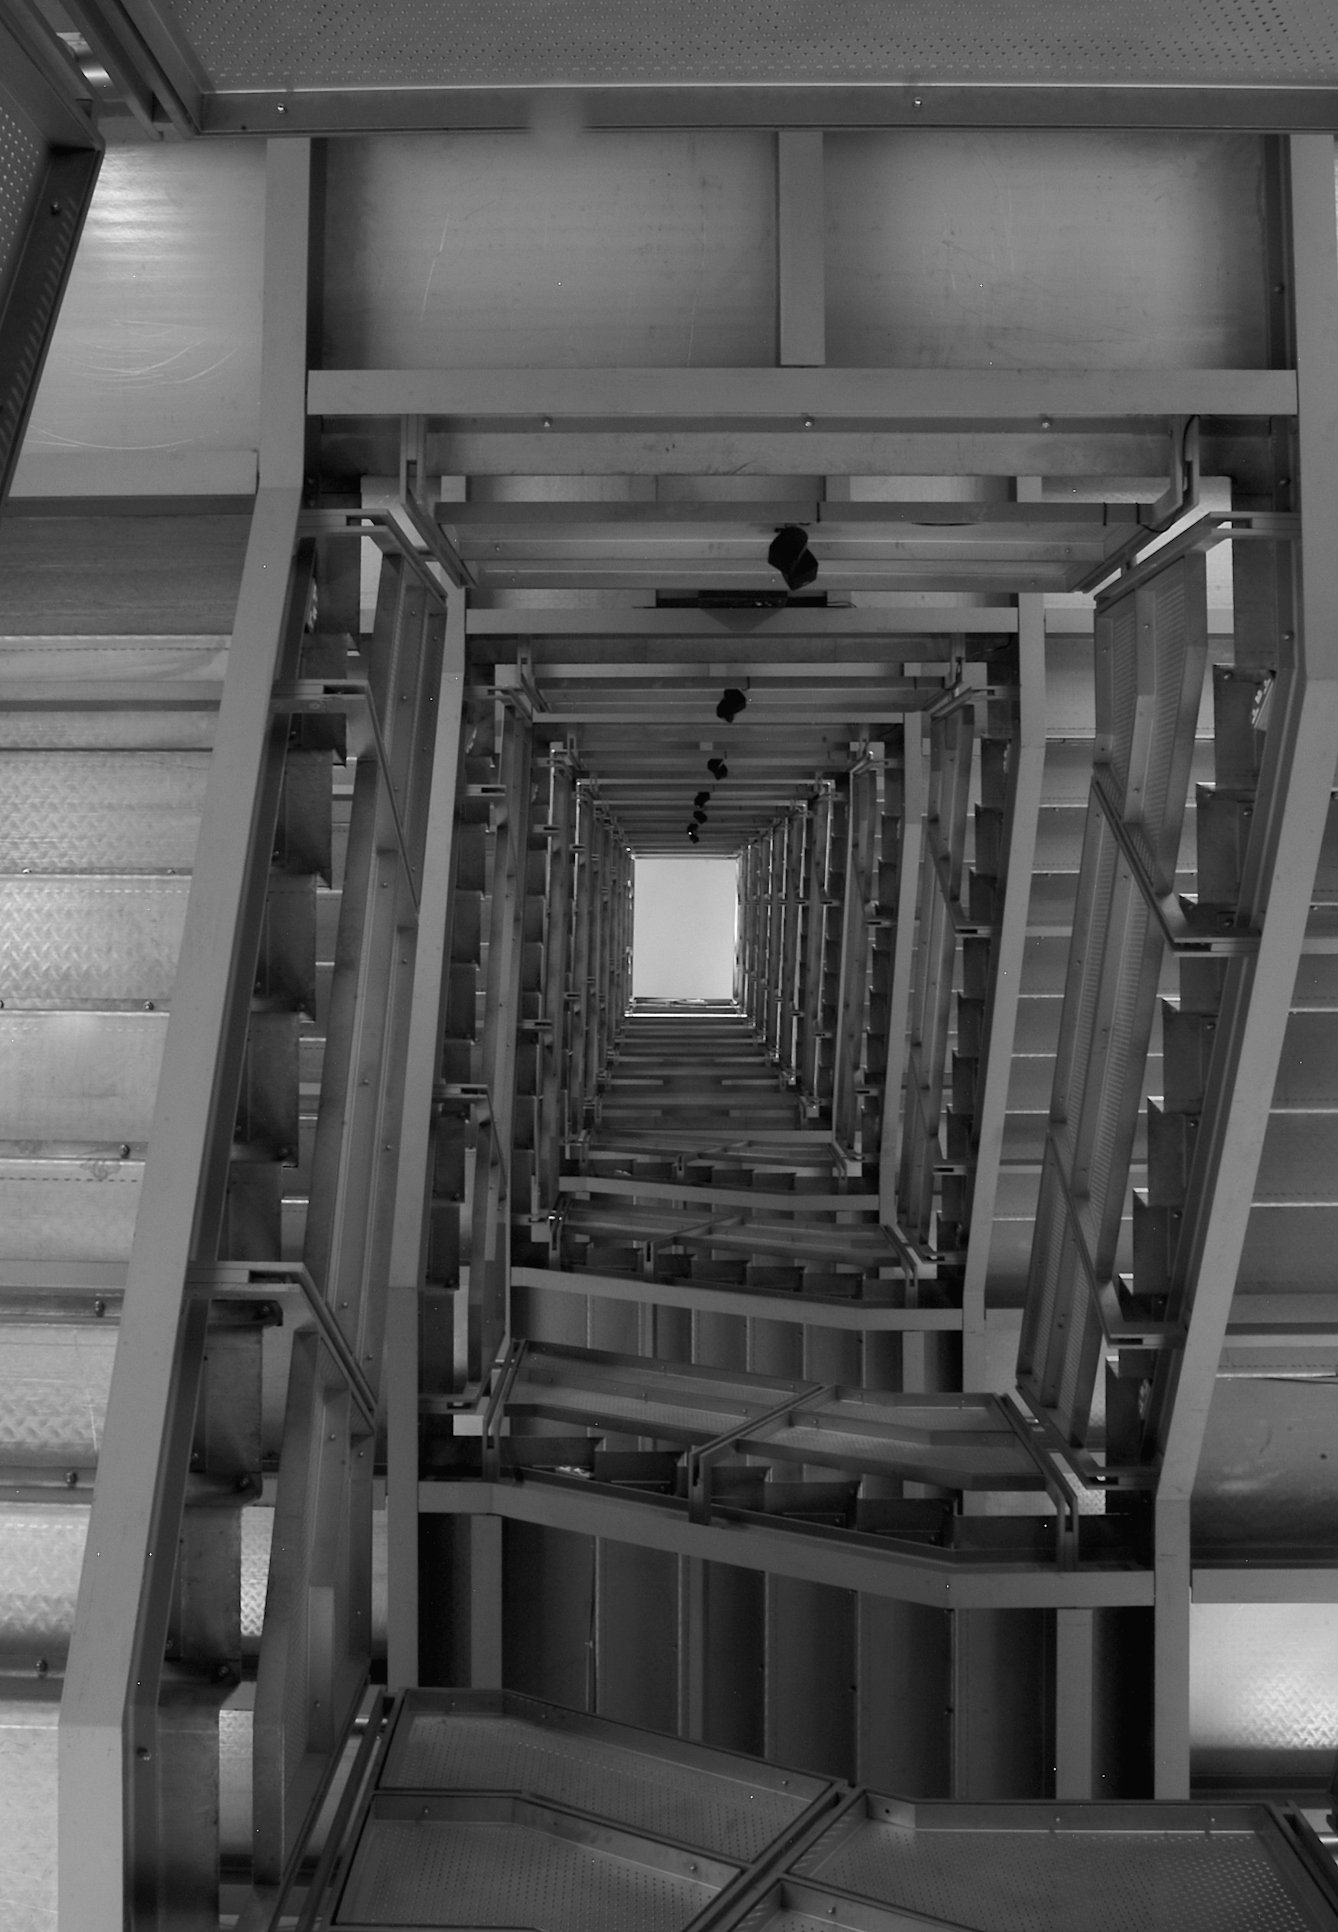 Photo shows the long distance to the ceiling when looking up from the bottom of a stairwell.